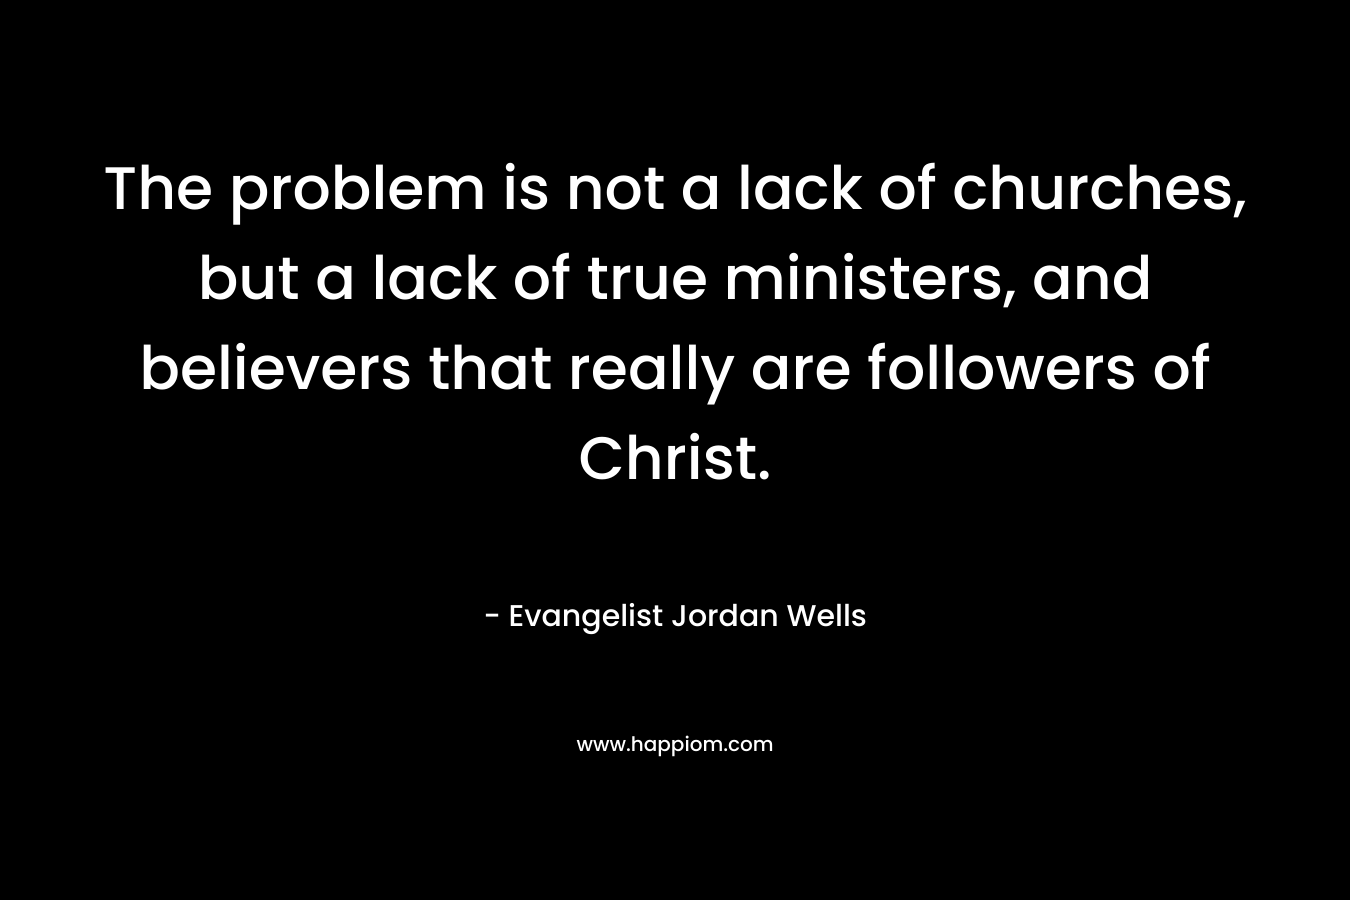 The problem is not a lack of churches, but a lack of true ministers, and believers that really are followers of Christ.